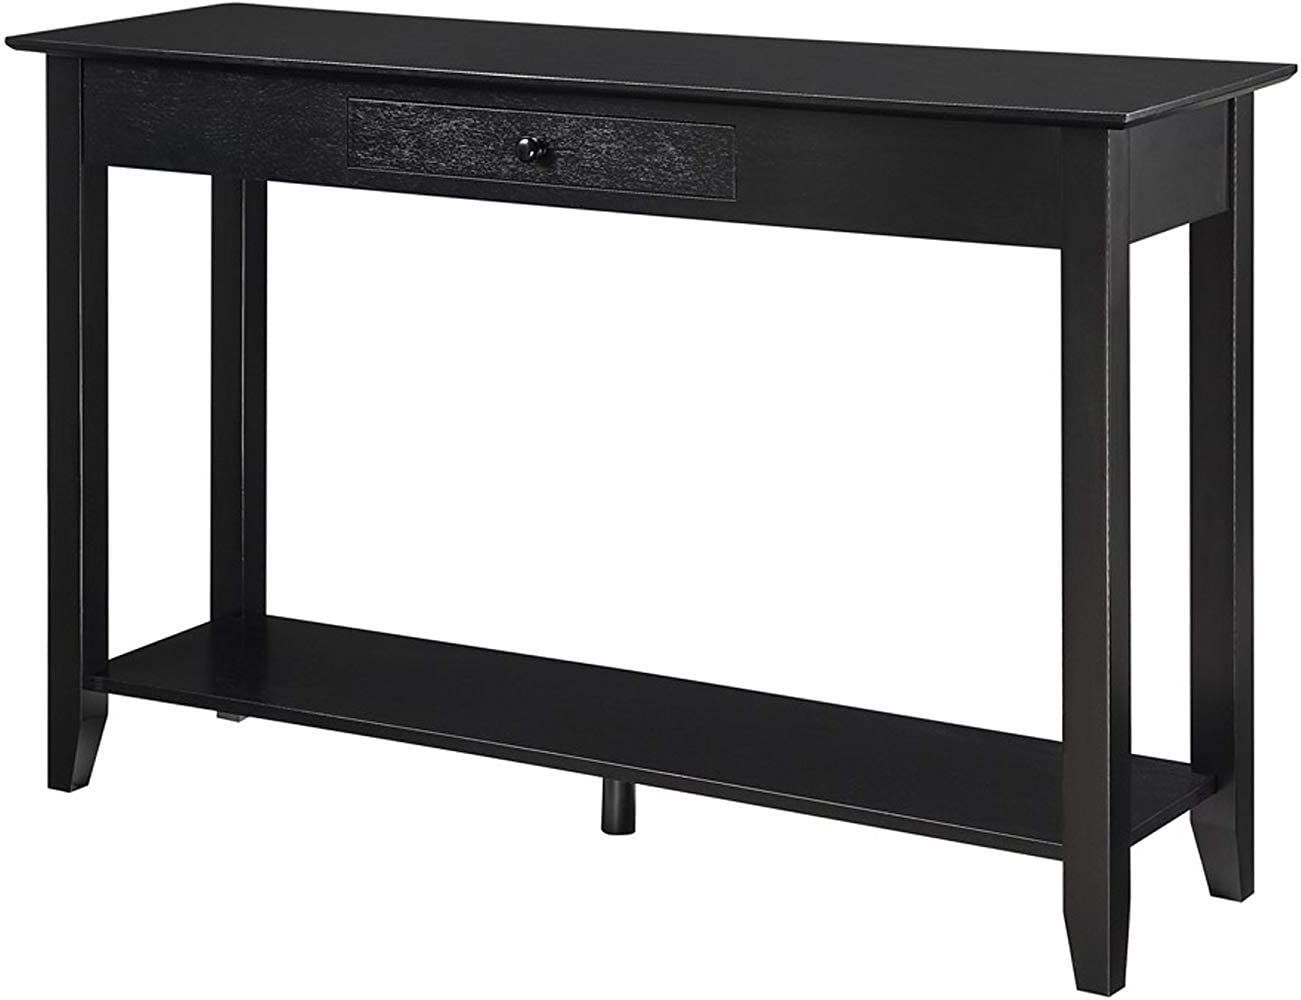 Convenience Concepts American Heritage Console Table with Drawer, Black | Amazon (US)